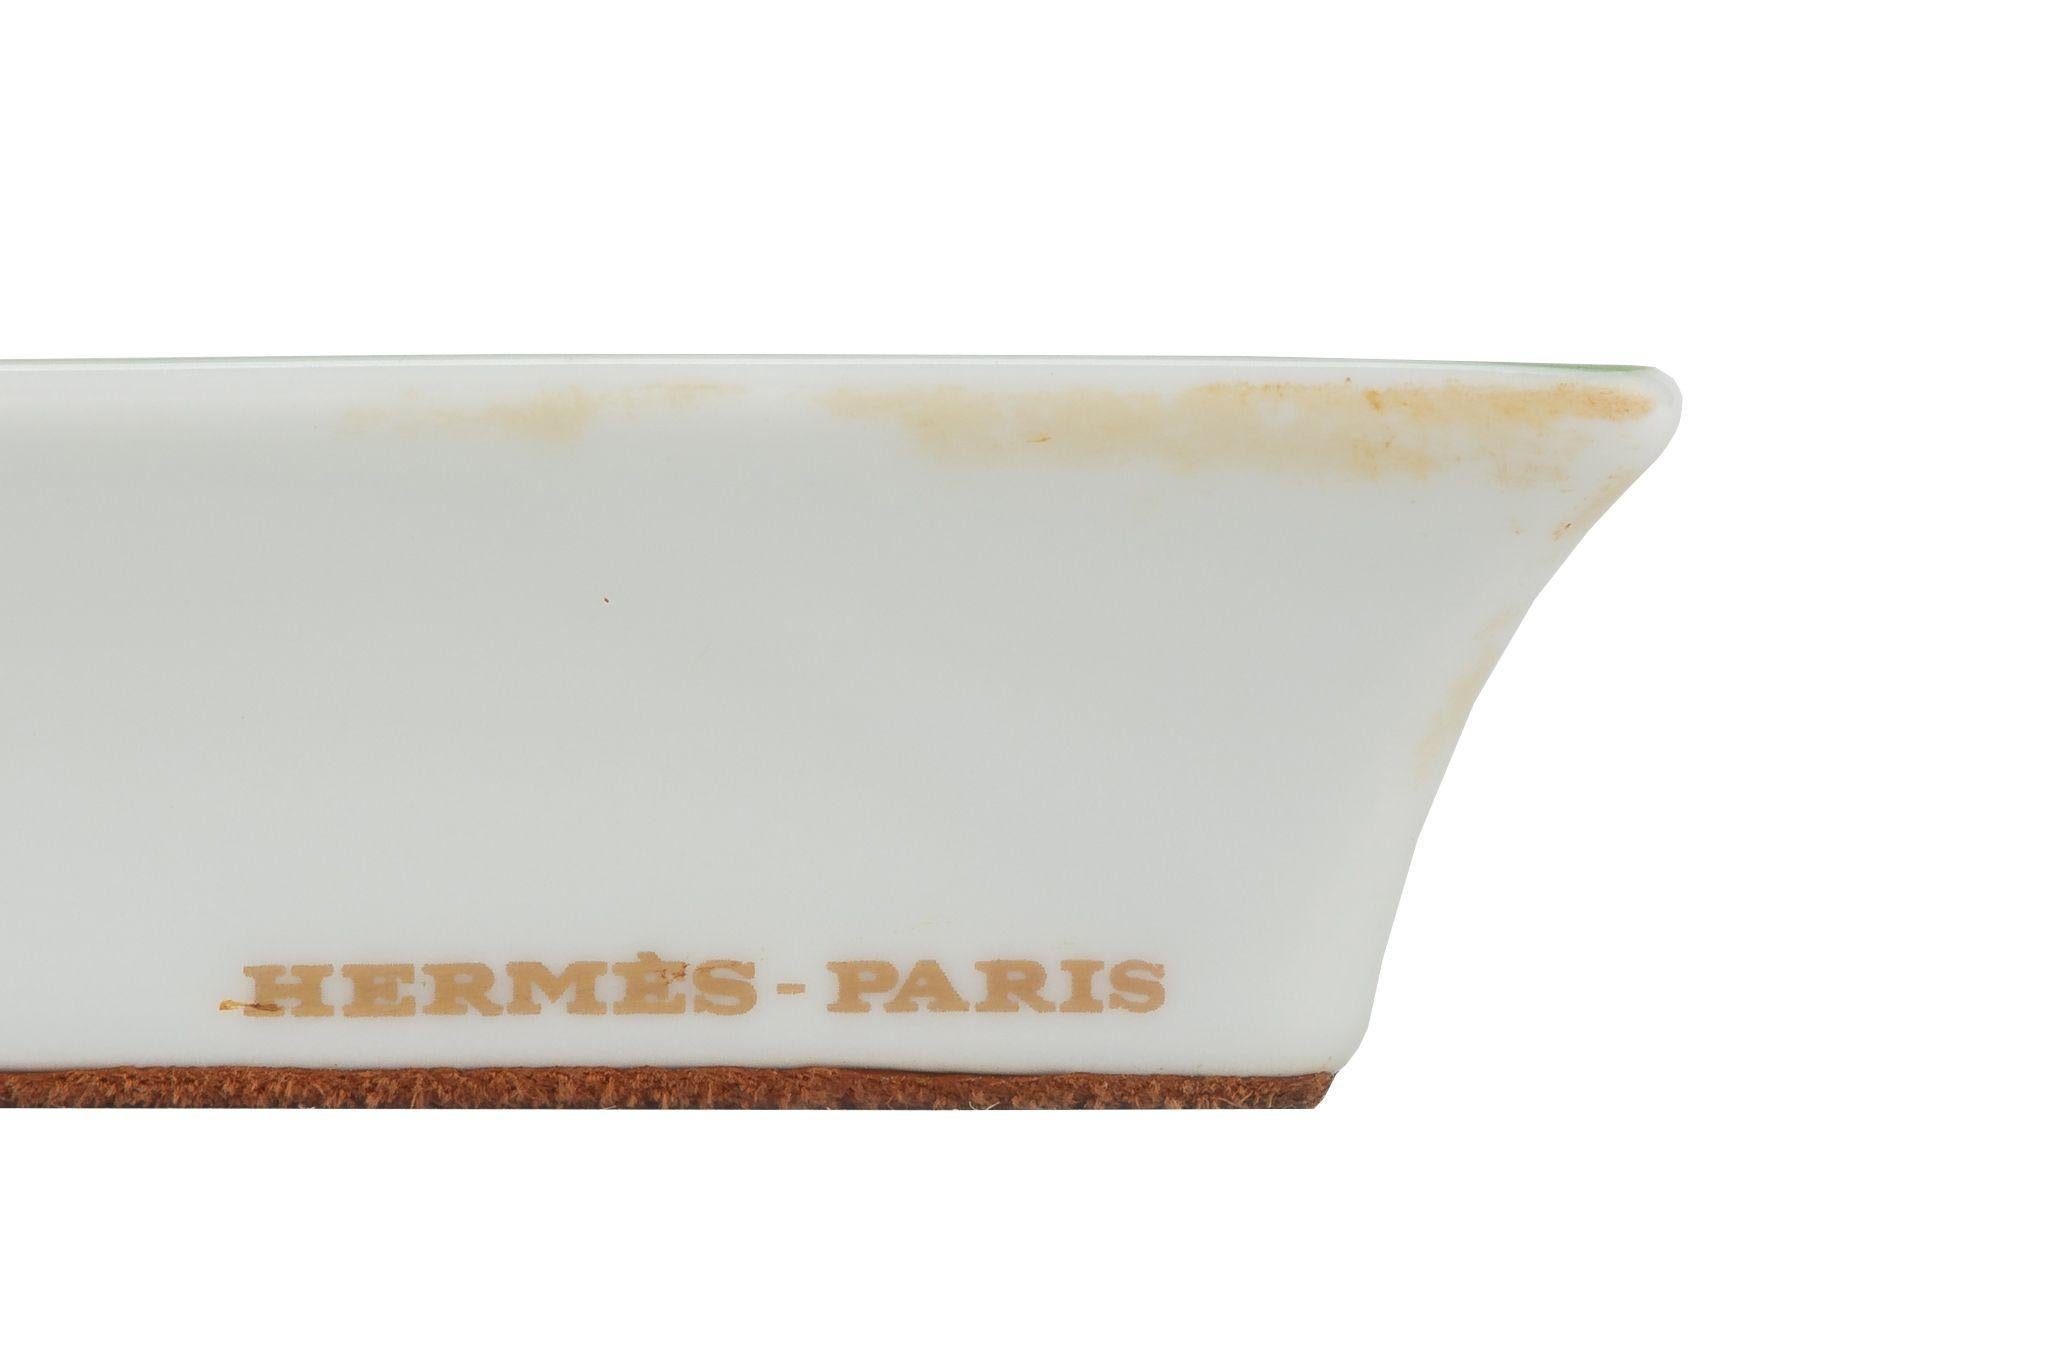 Hermès Brazil Porcelaine ashtray. The piece is square and the paint shows a big pheasant in the center opening is feathers. The tray is in excellent condition with minor wear on the back suede.